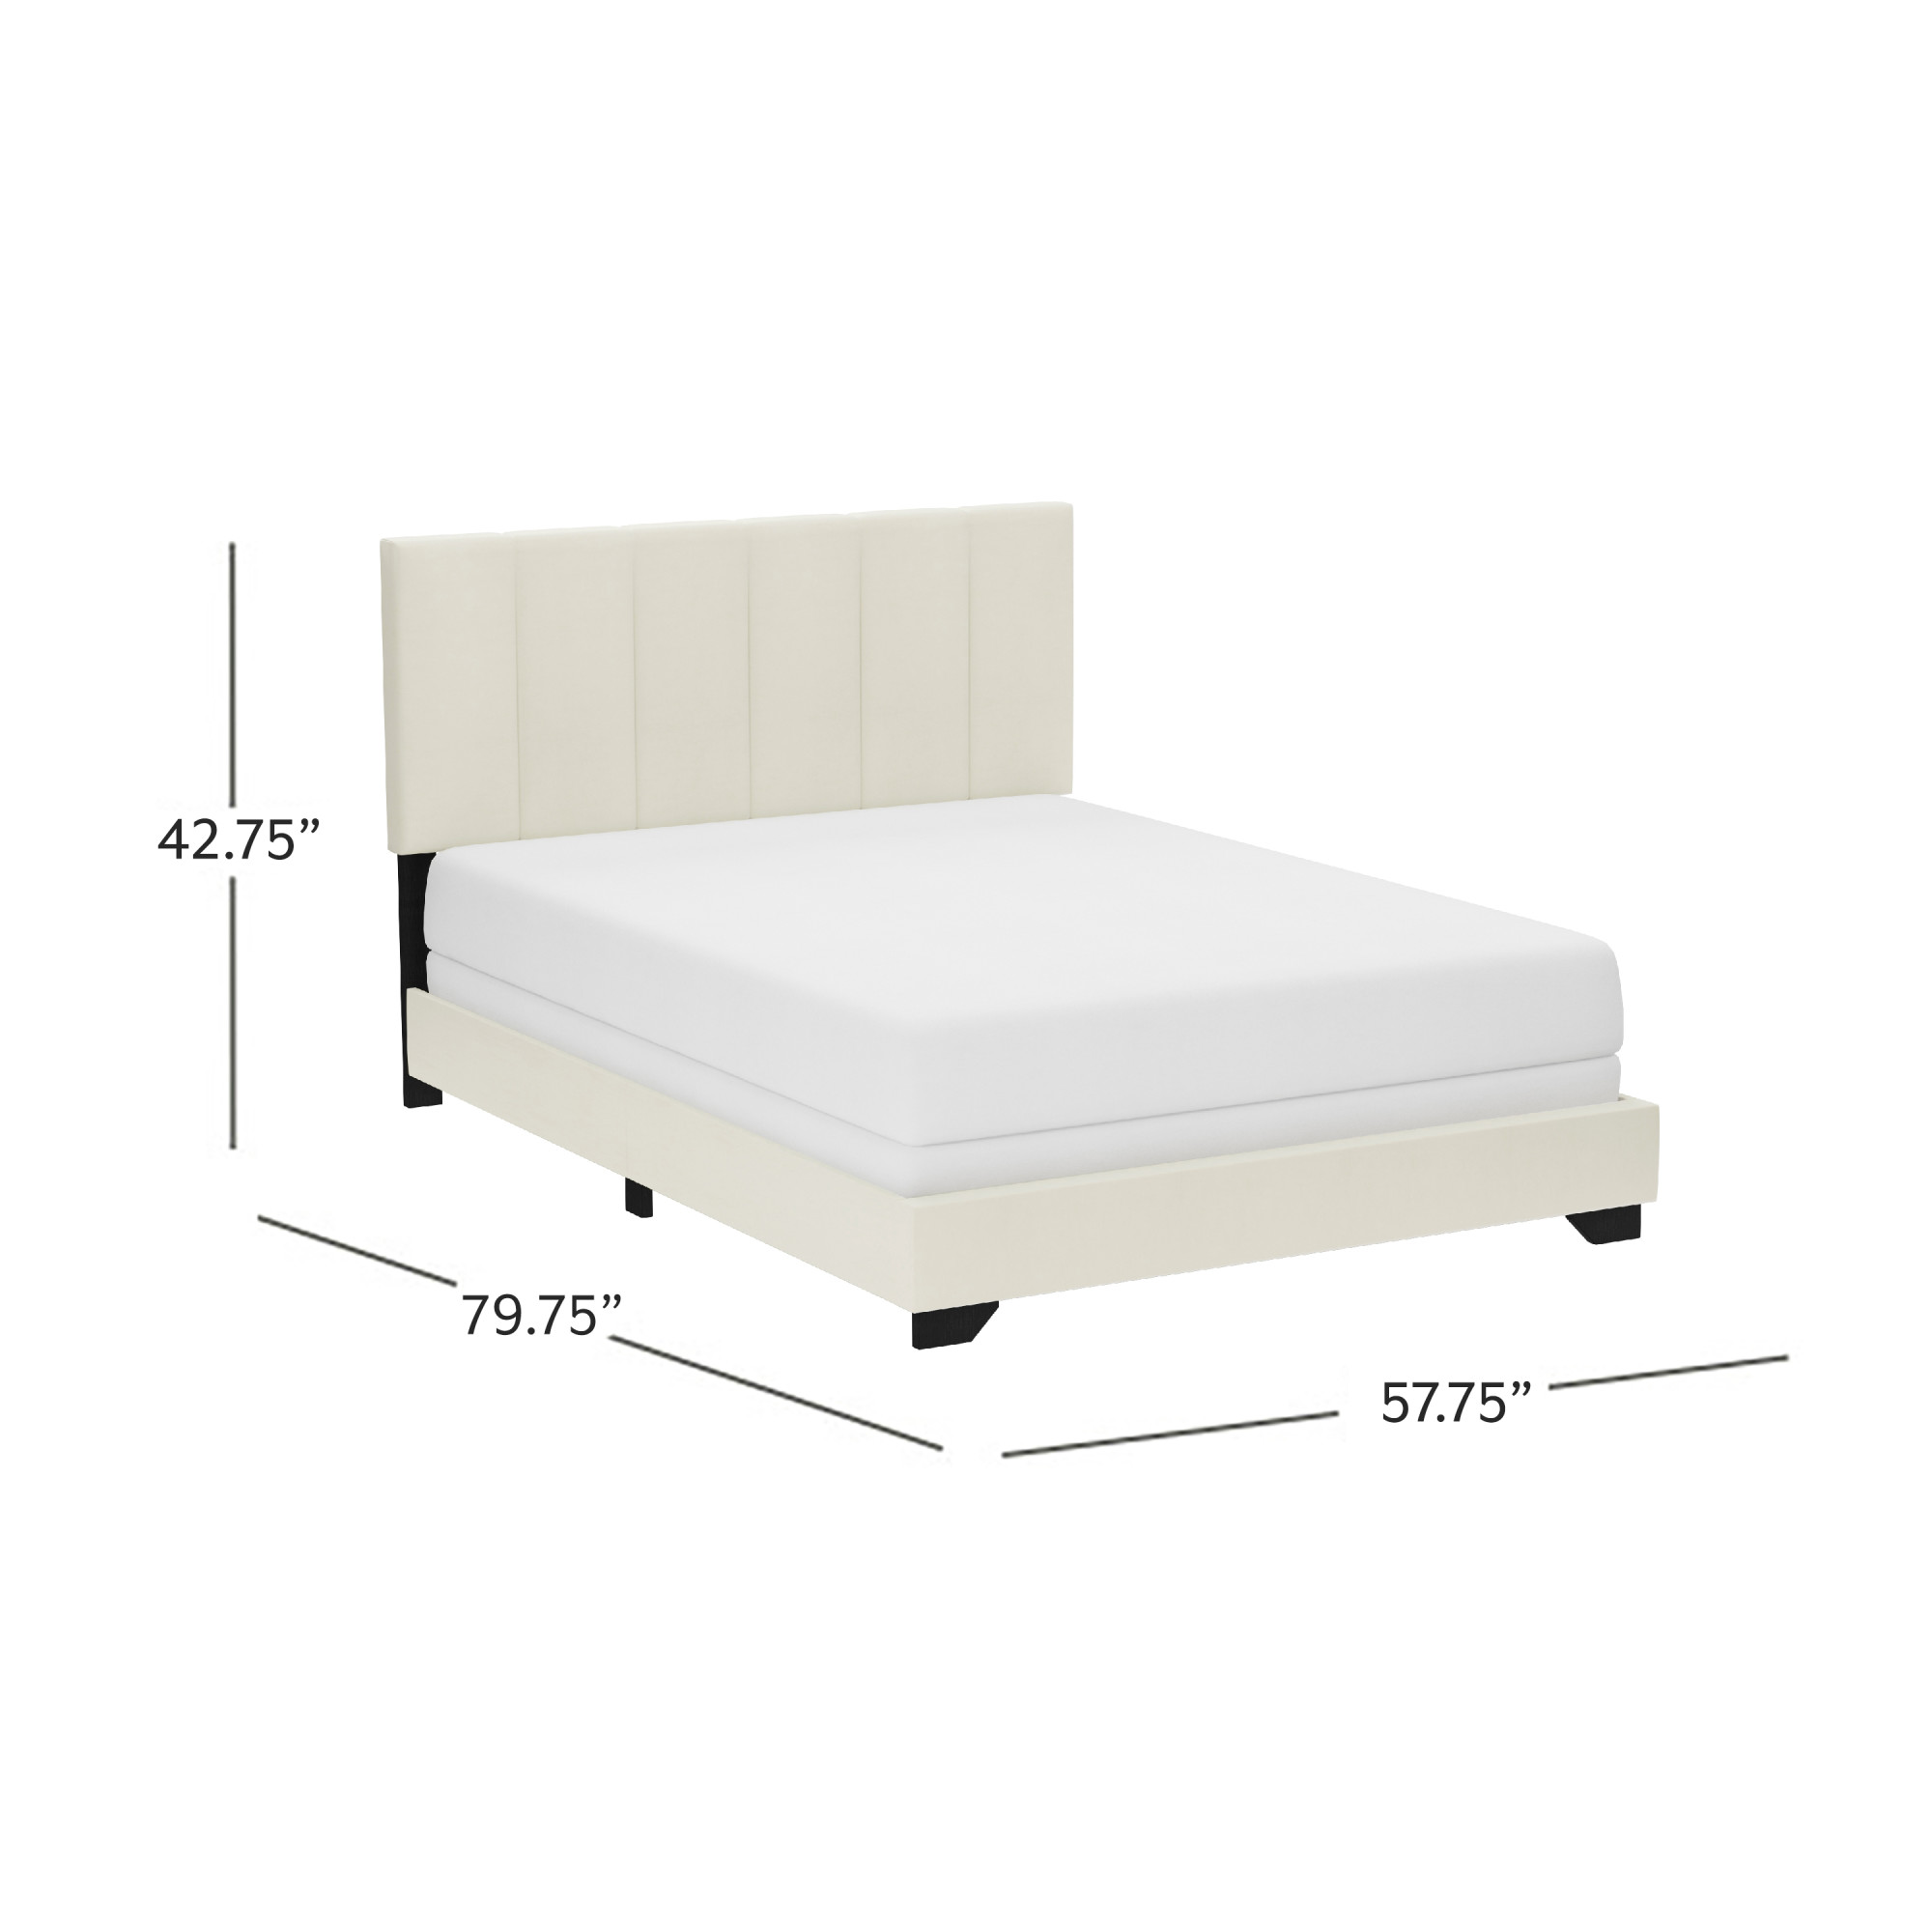 Reece Channel Stitched Upholstered Full Bed, Ivory, by Hillsdale Living Essentials - image 4 of 17